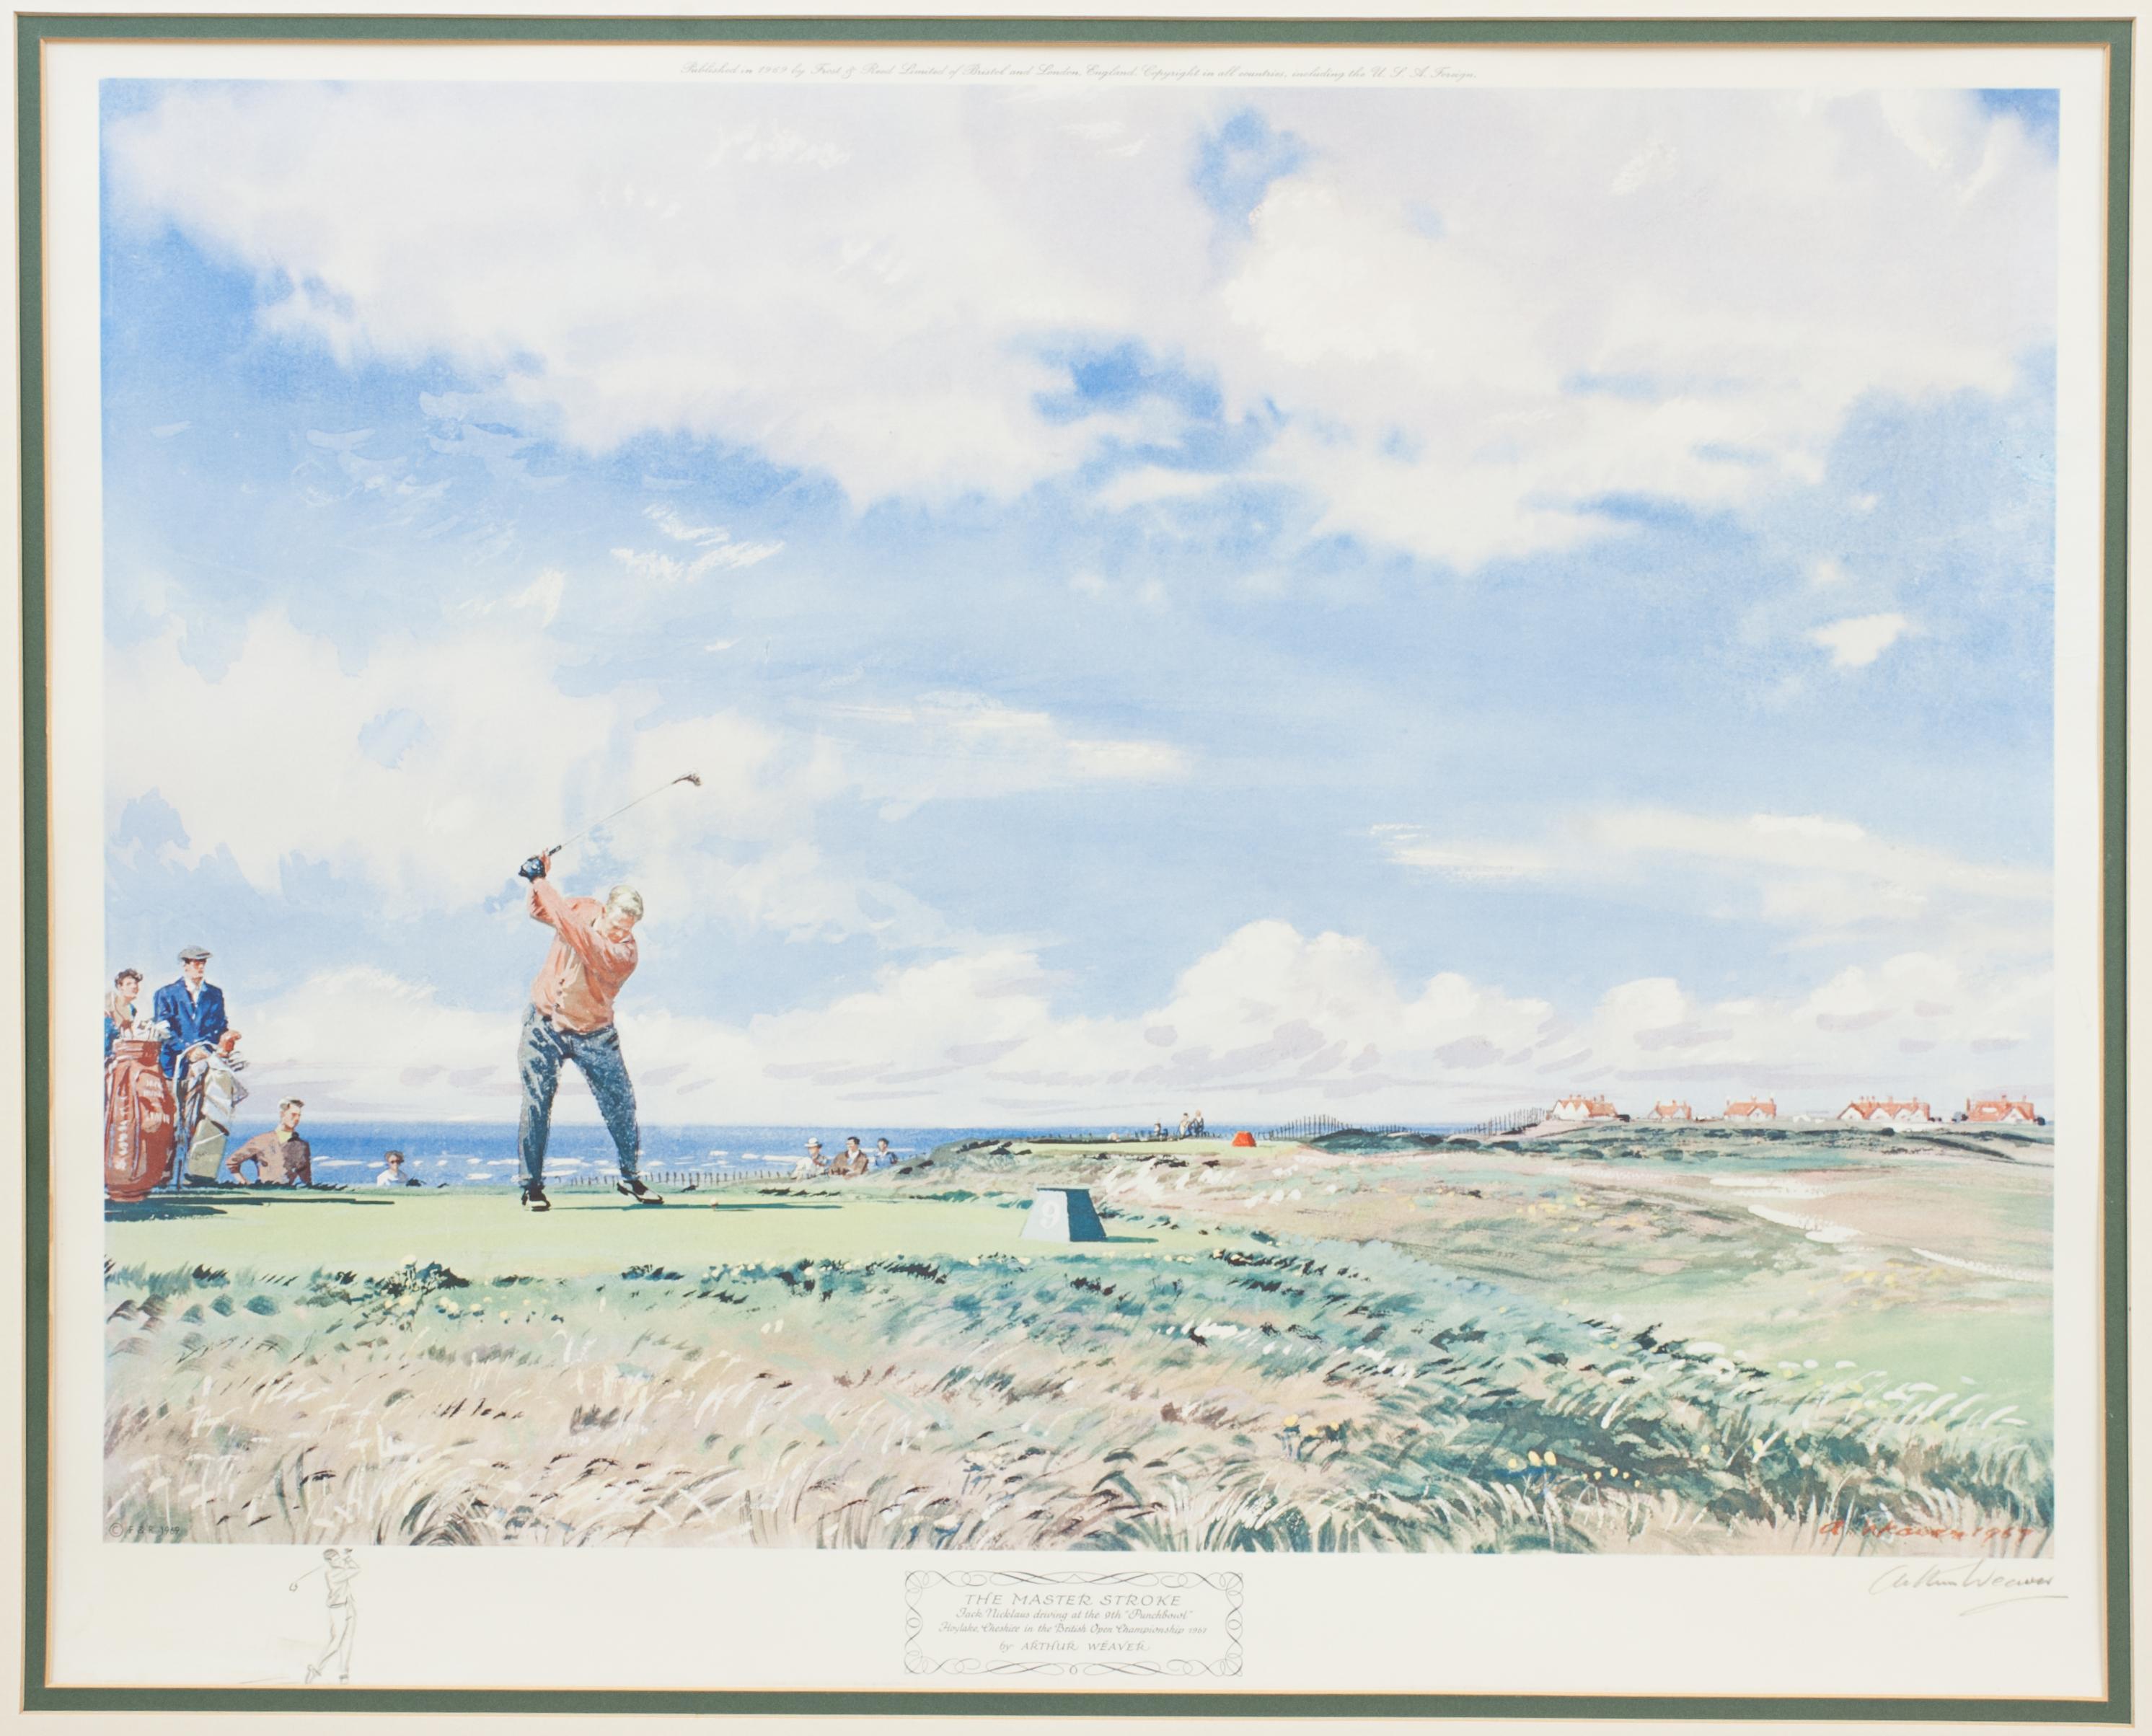 Jack Nicklaus Golf Print By Arthur Weaver.
A colourful golf lithograph signed by the artist, Arthur Weaver, of Jack Nicklaus driving at the 9th hole 